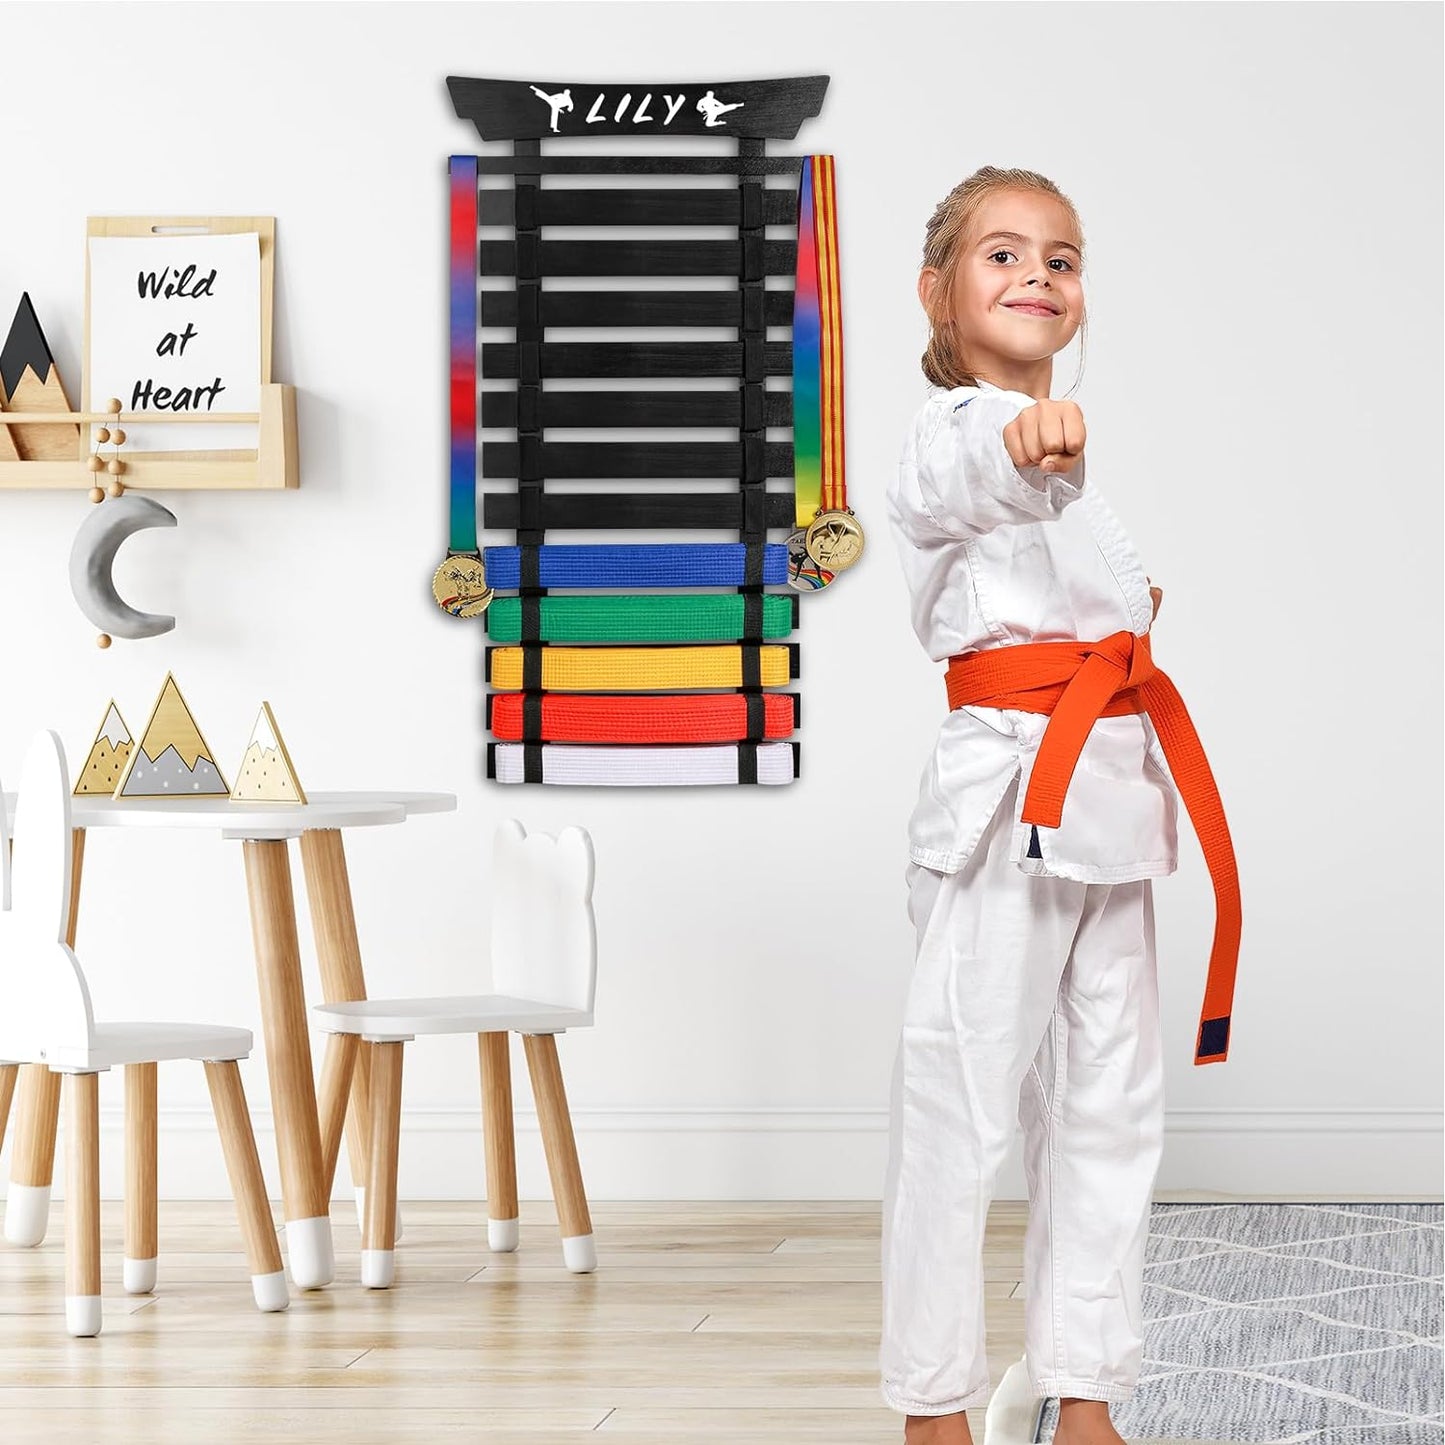 Eclipse Martial Art Supplies sporting goods 12 Belts Karate Belt Display Rack with Stickers, Martial Arts Belt Display Holder, Taekwondo Belt Jiu Jitsu Belt BJJ Belt Display Hanging Holder for Kids and Adults Gifts